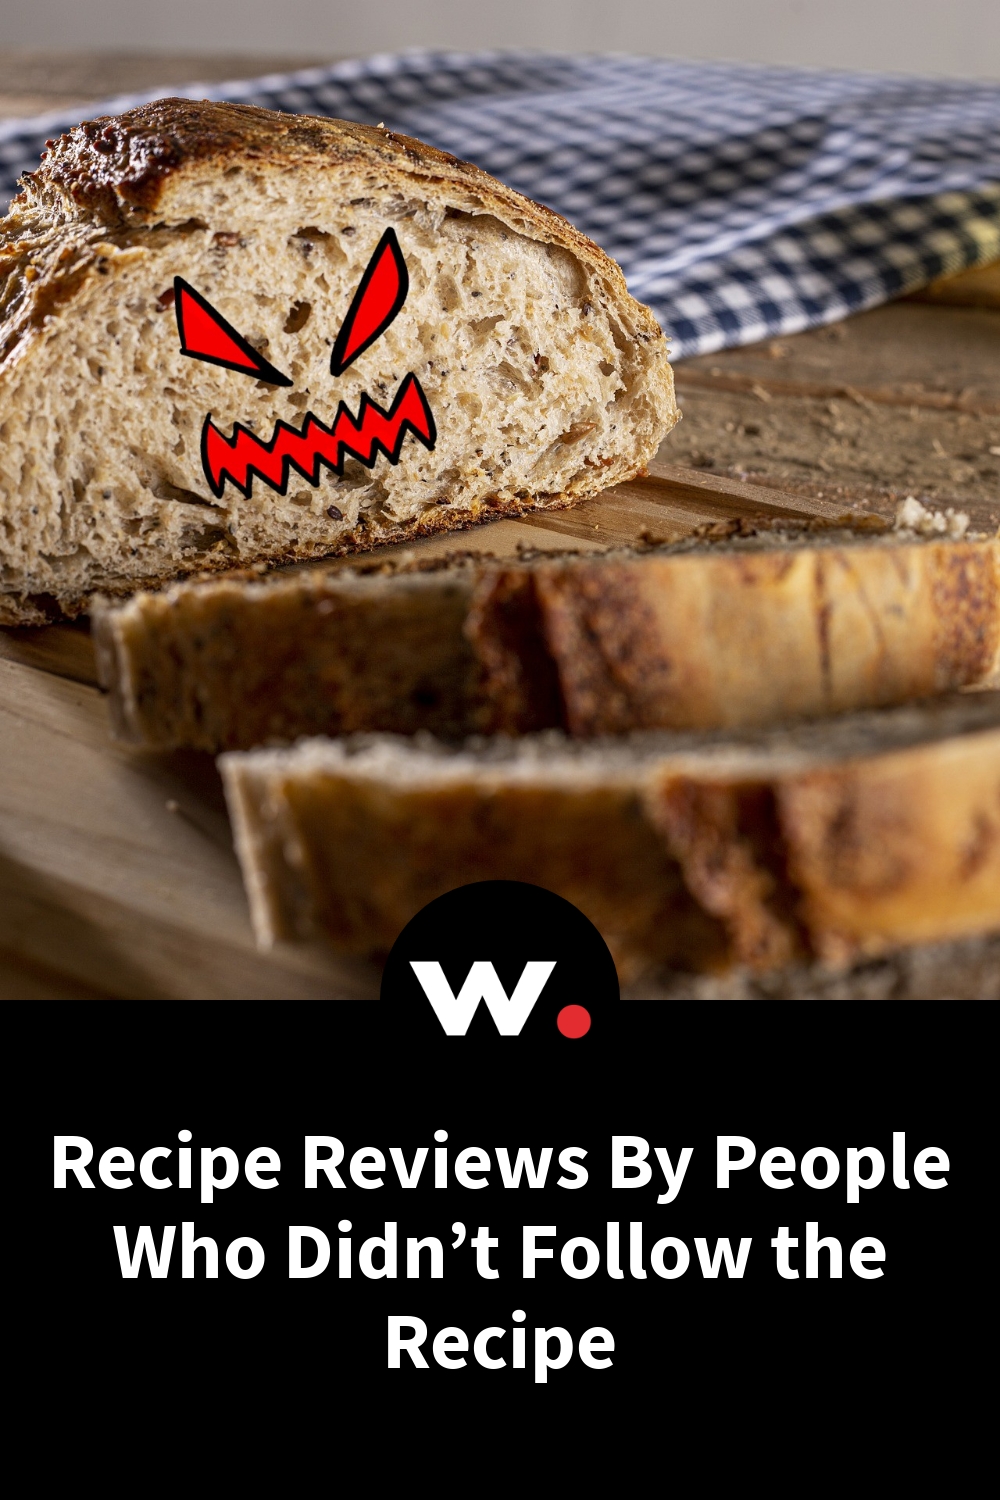 Recipe Reviews By People Who Didn’t Follow the Recipe